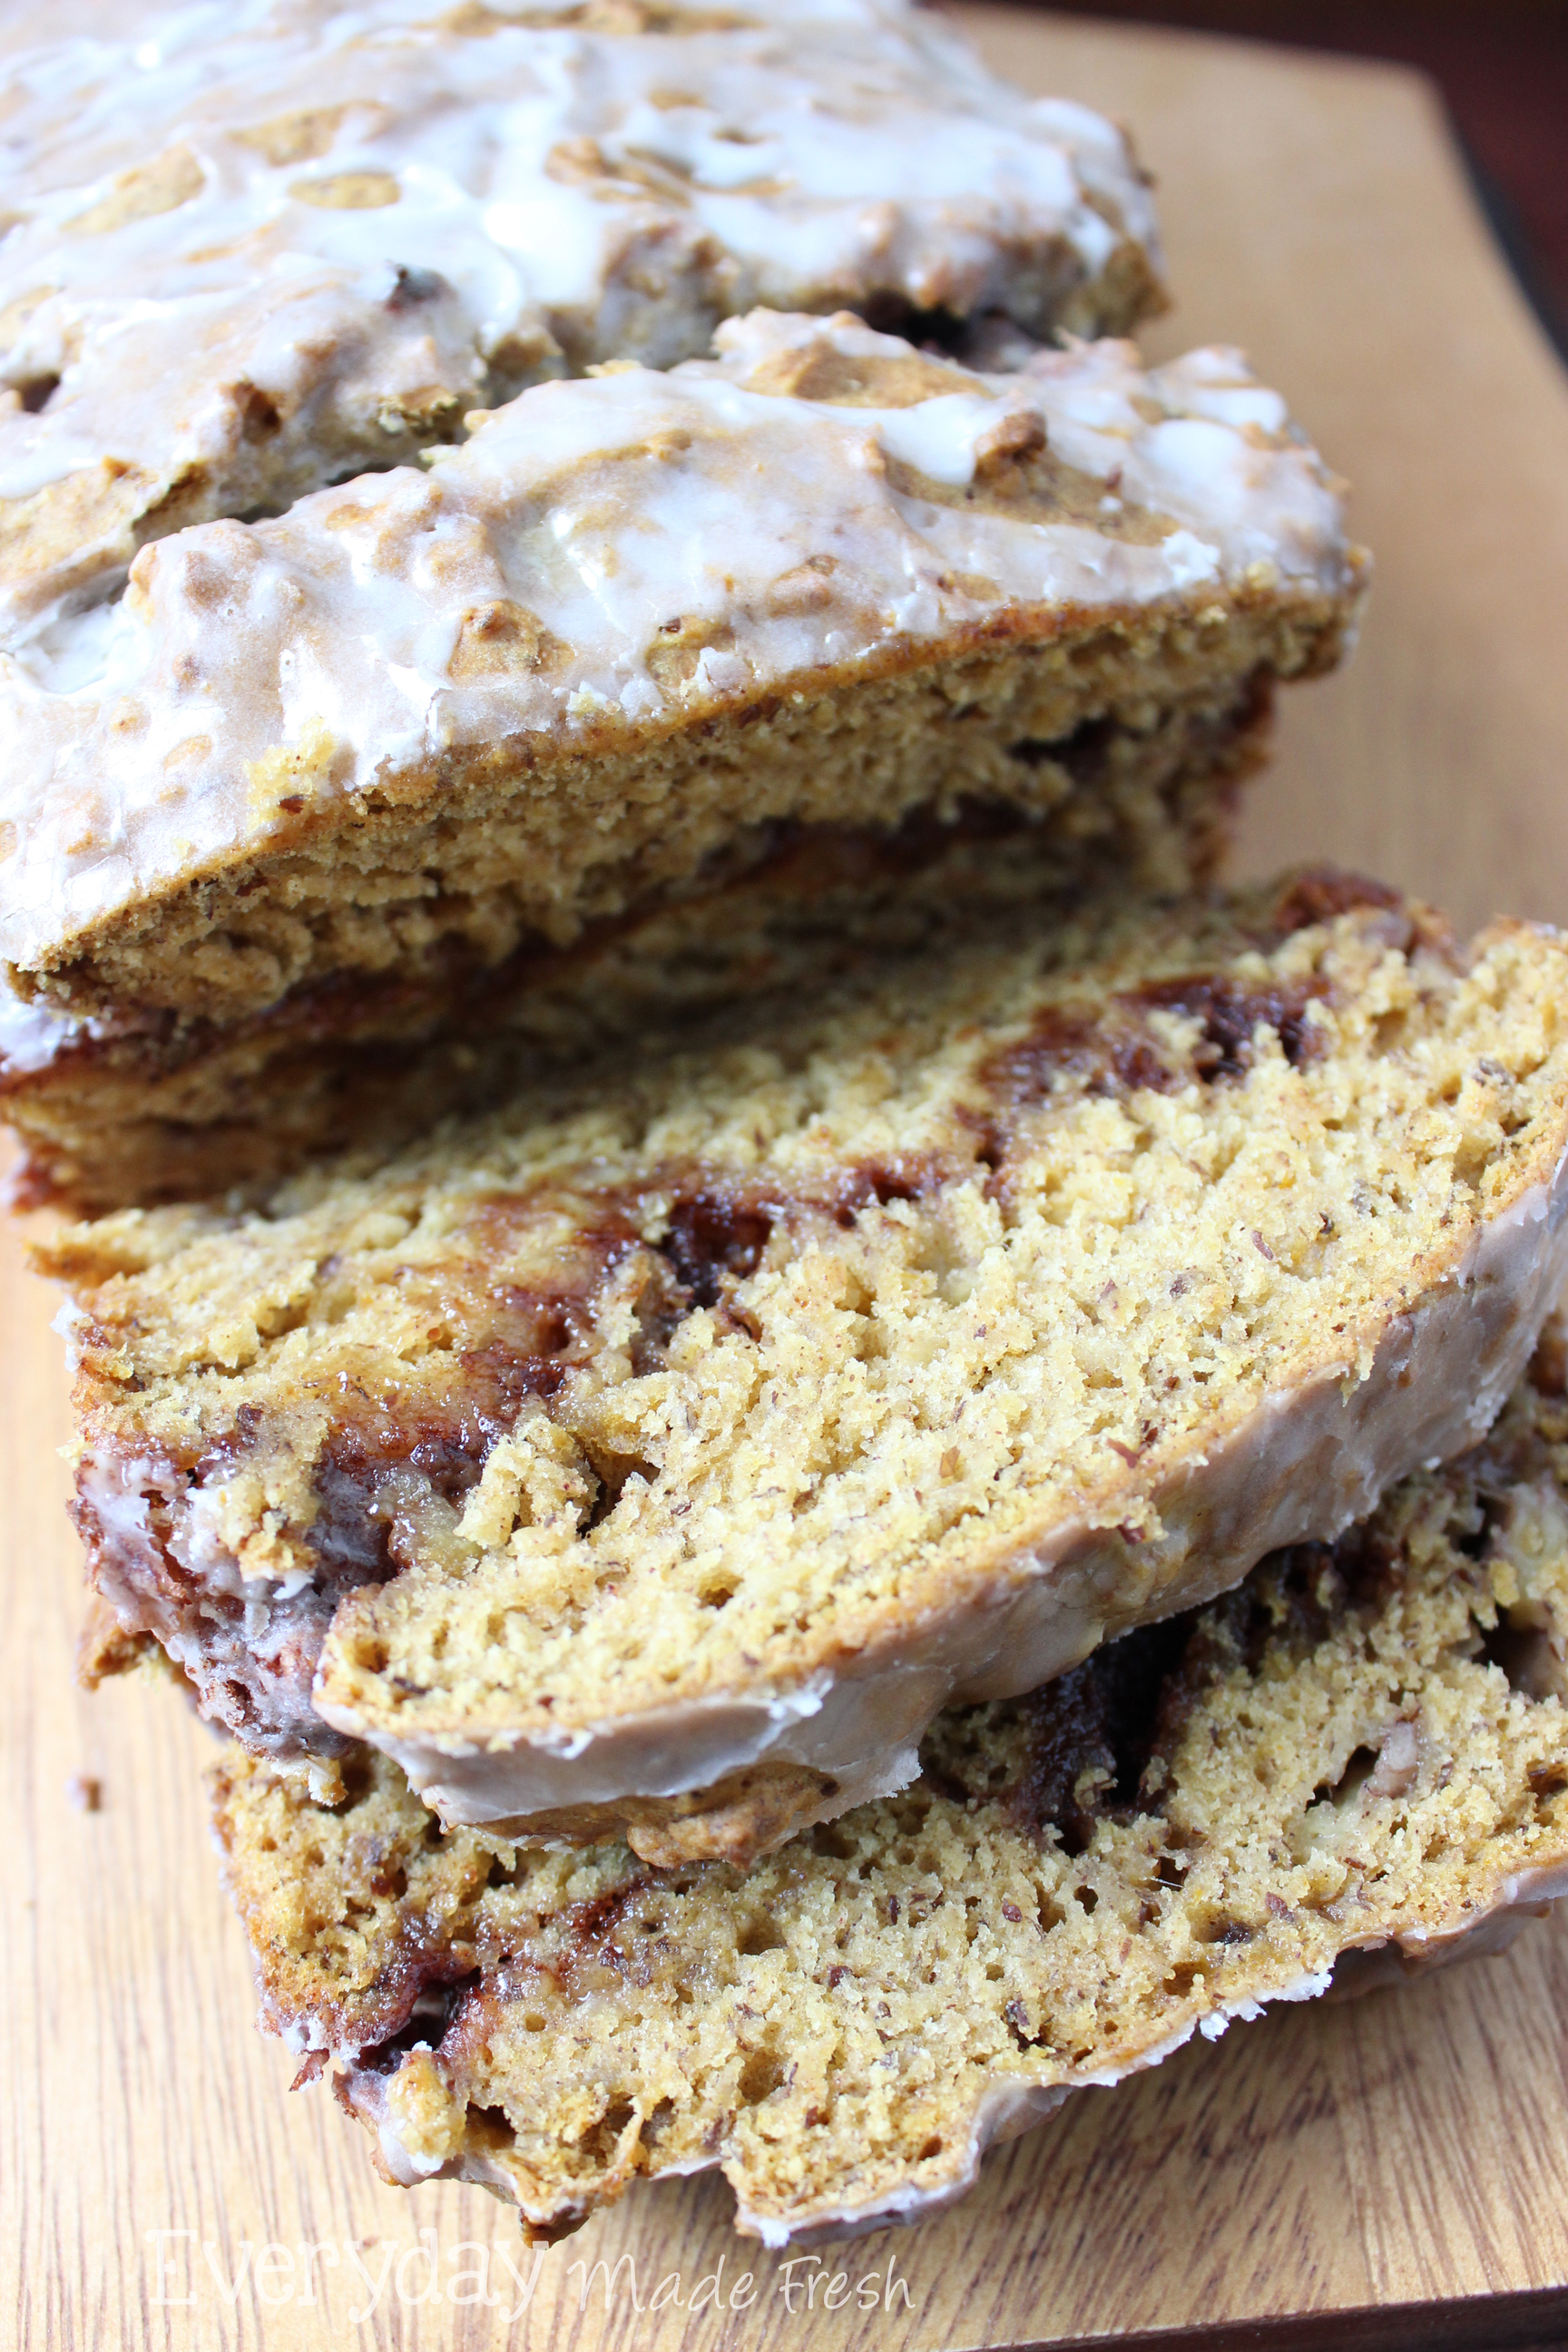 This banana bread is ready for fall with pumpkin swirled with a cinnamon mixture. Slice and serve warm just like it is here!